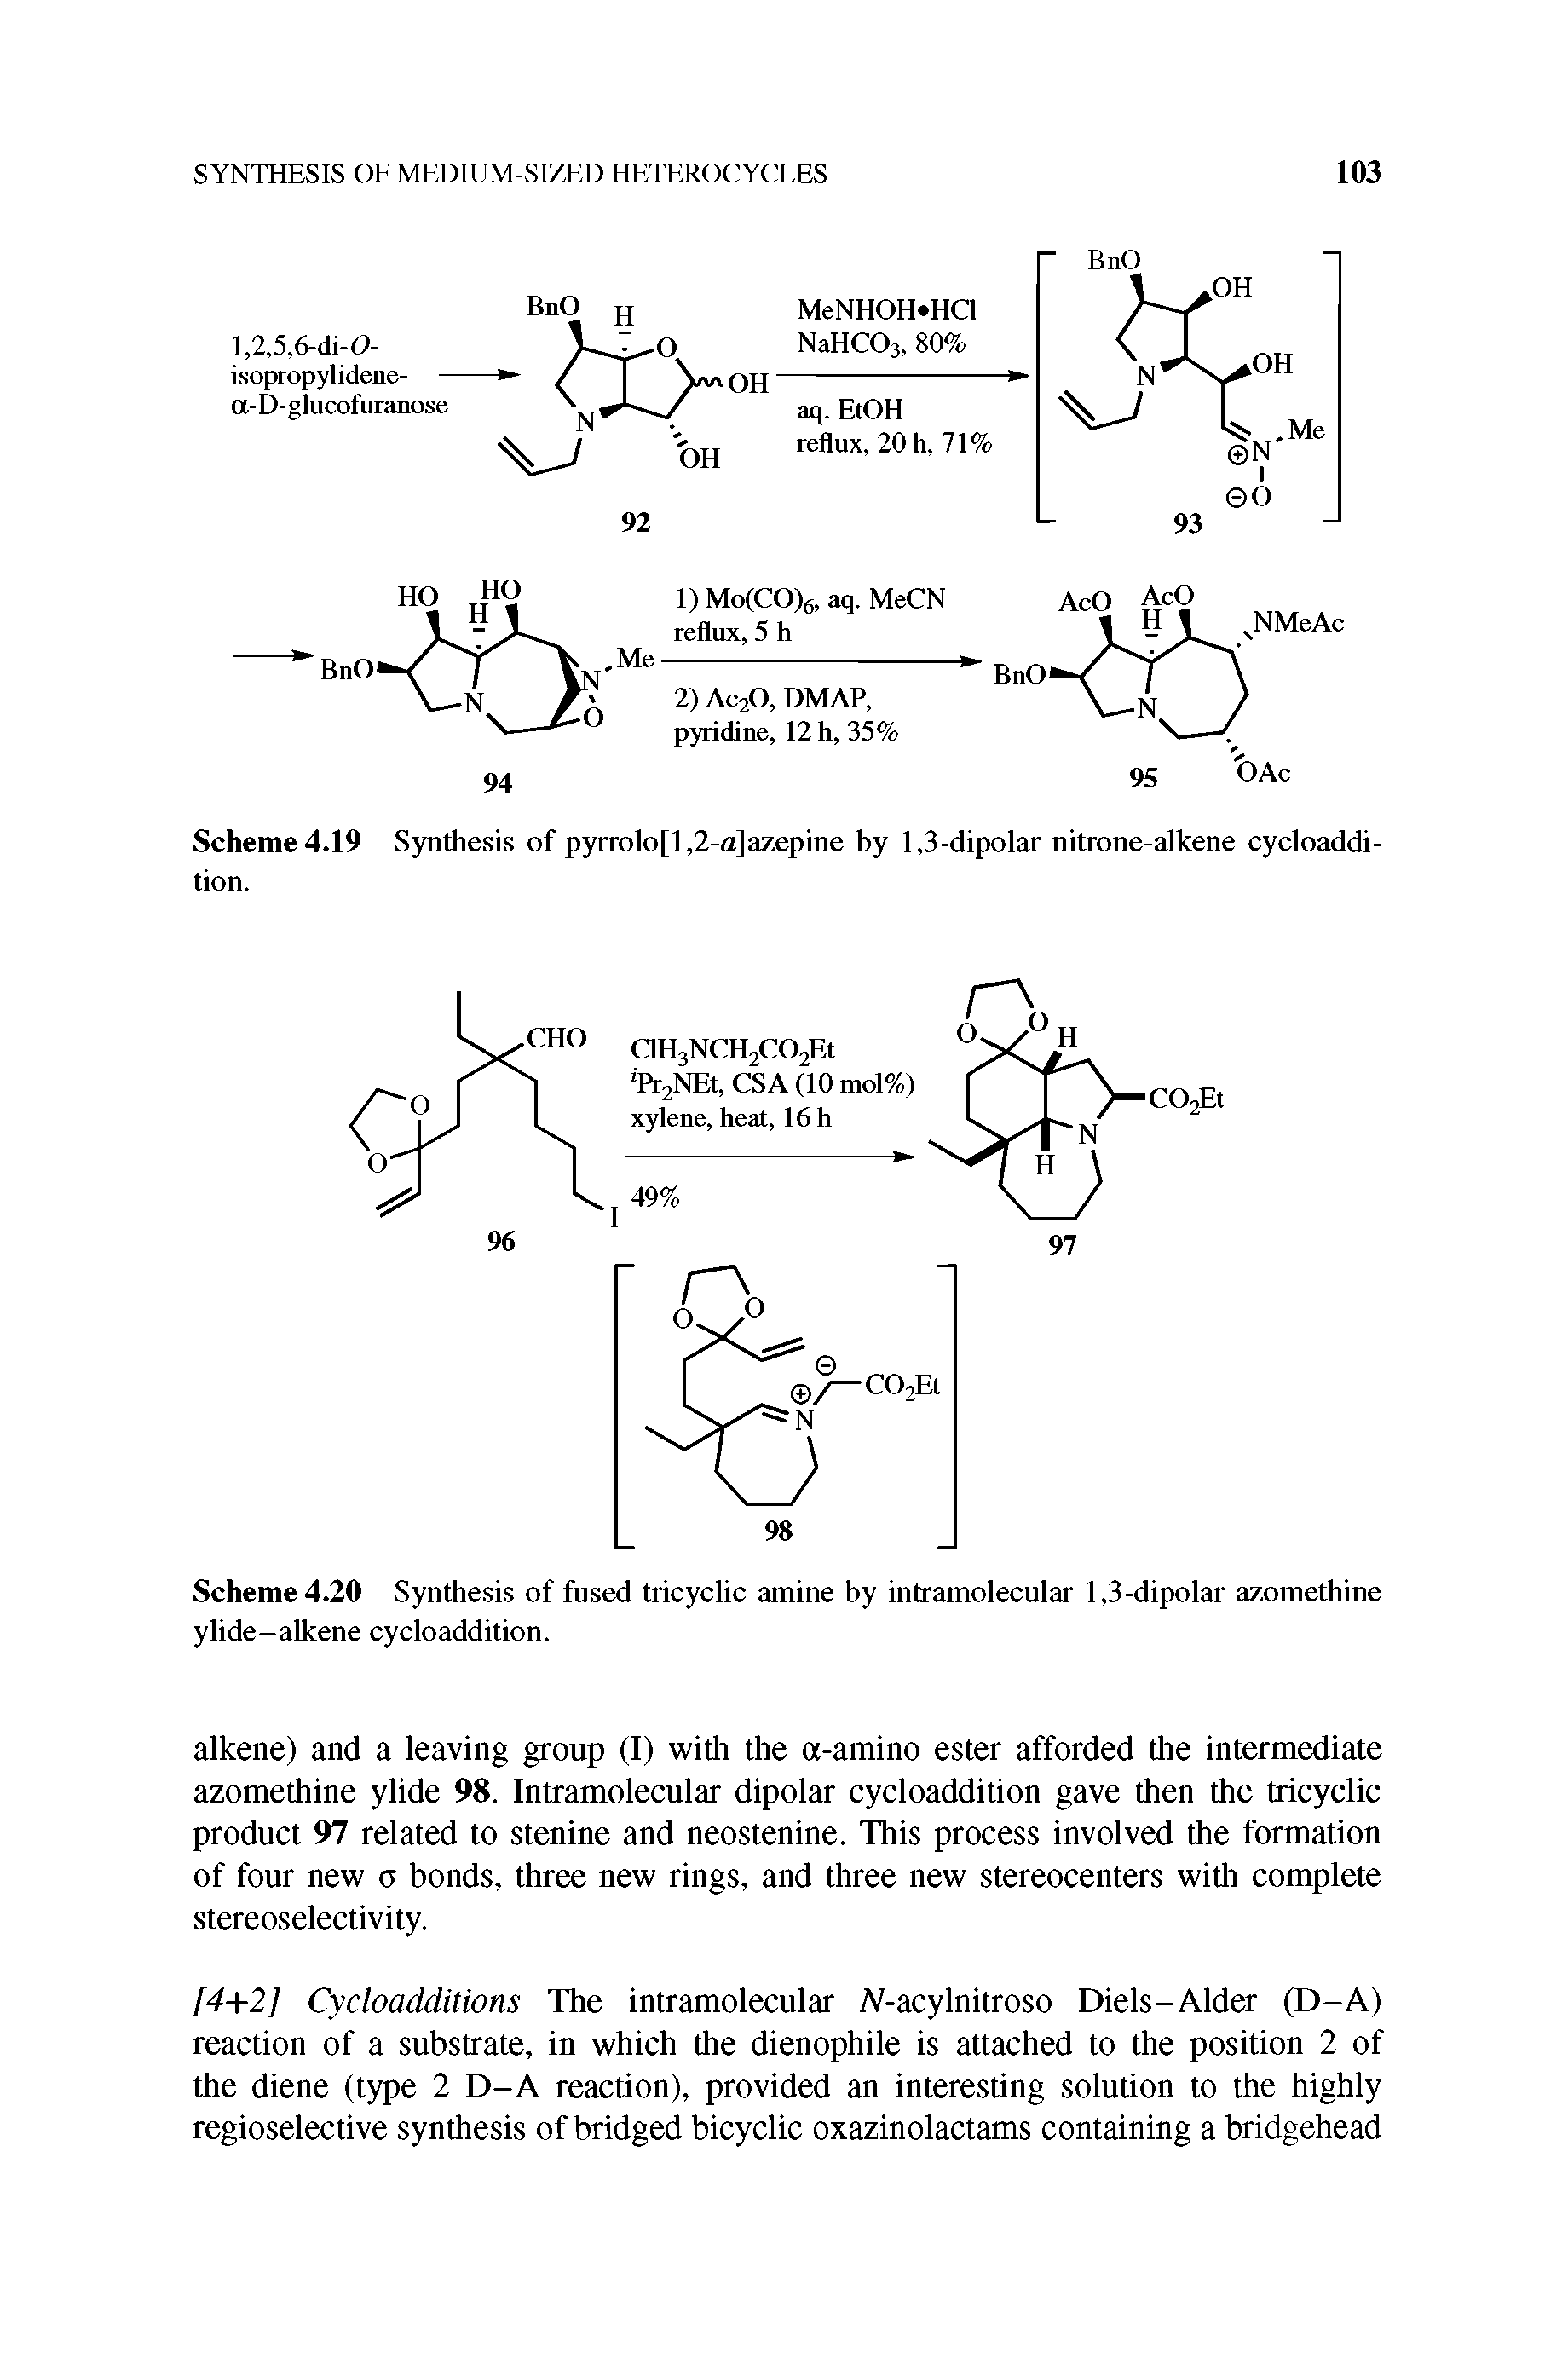 Scheme 4.19 Synthesis of pynolo[l,2-a]azepine by 1,3-dipolar nitrone-alkene cycloaddition.